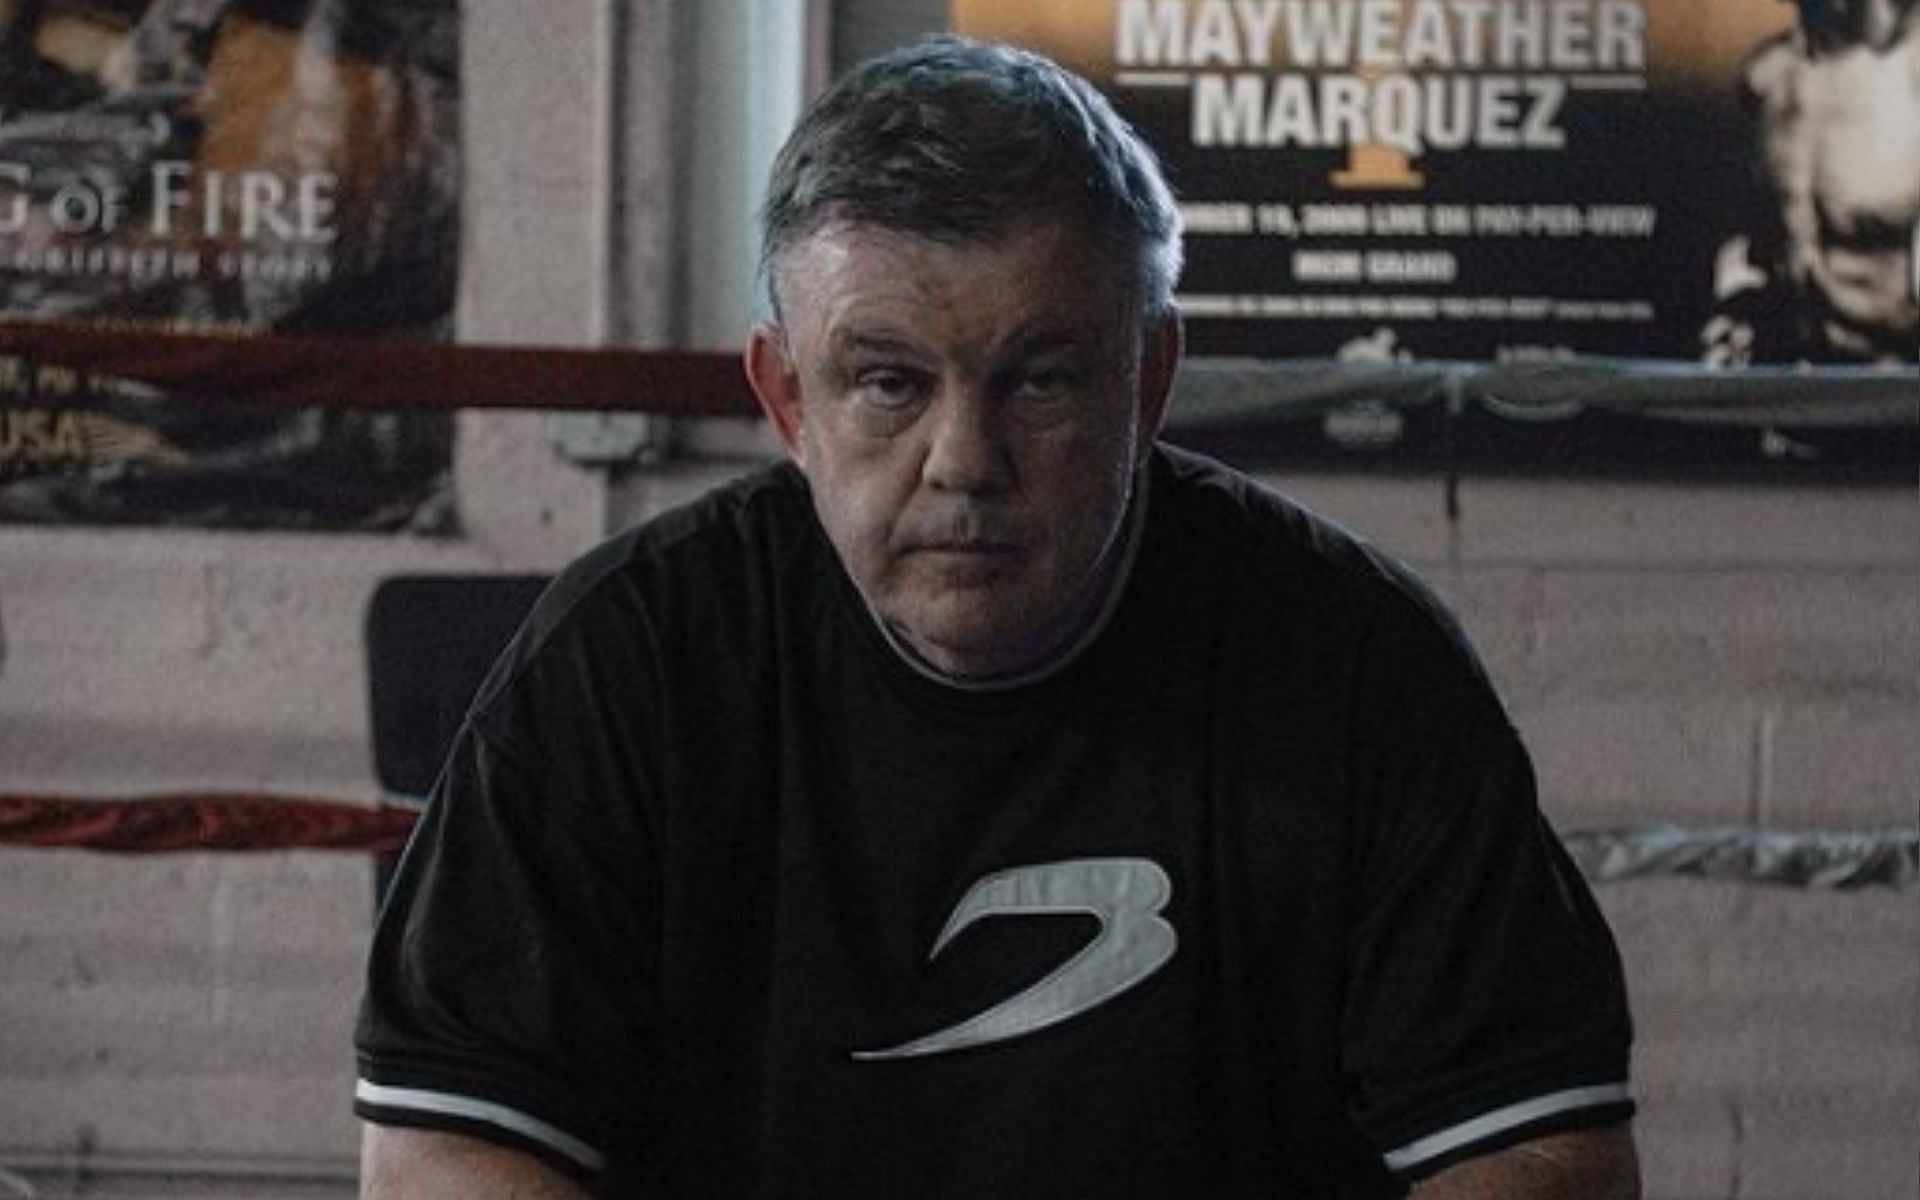 Boxing trainer and combat sports commentator Teddy Atlas (Image Credit: @teddy_atlas on Instagram)